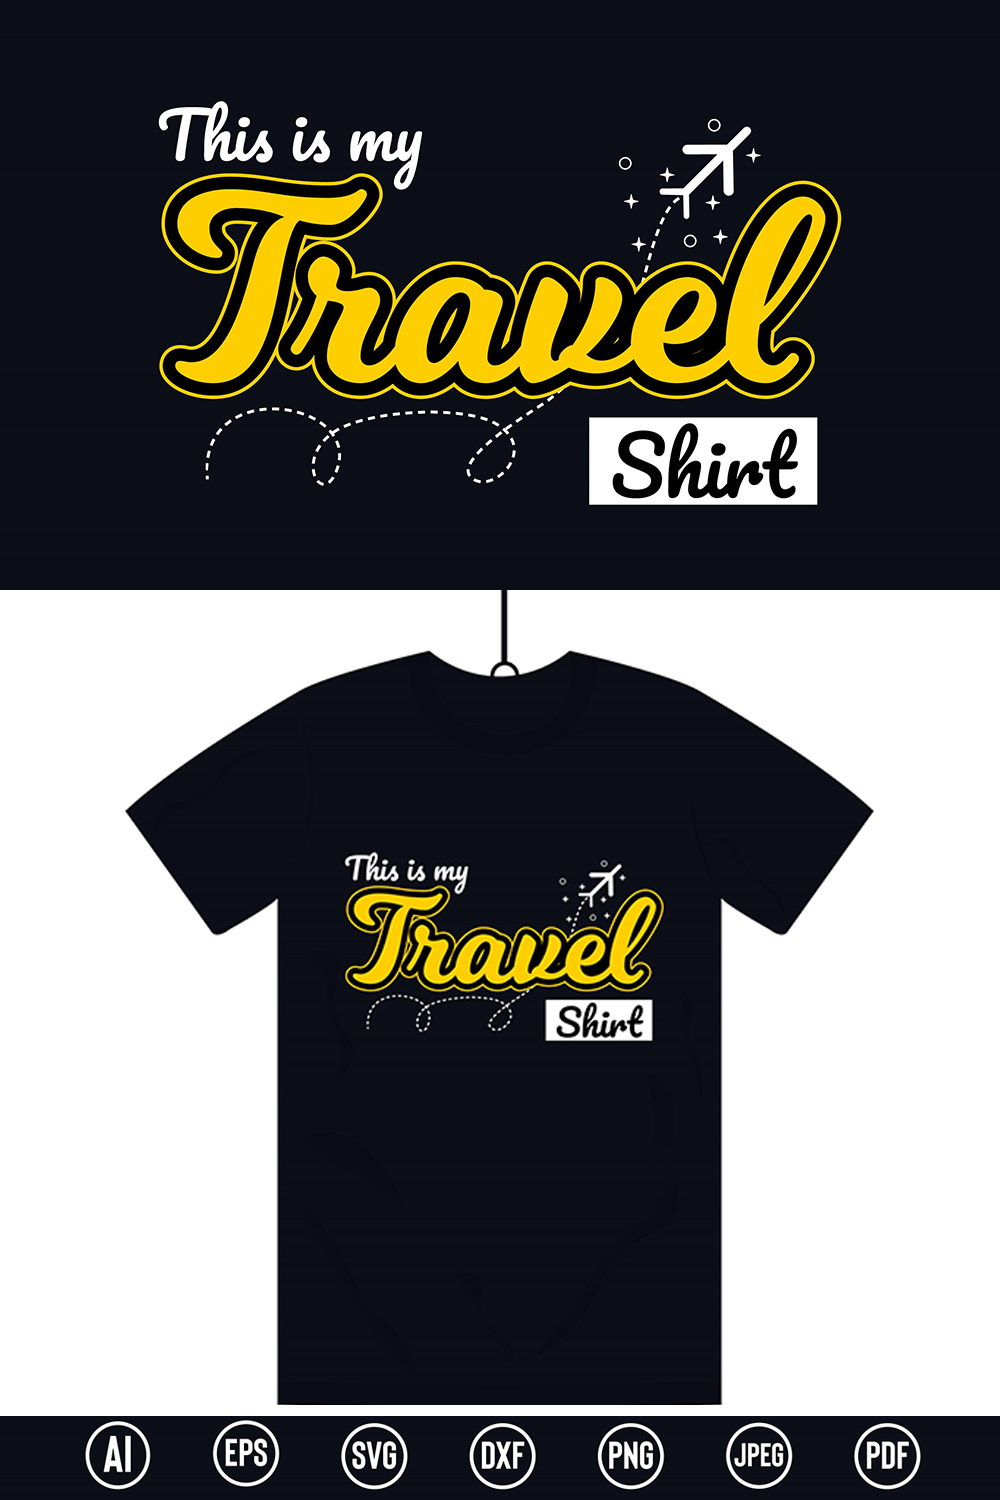 Modern Typography Traveler T-Shirt design with “This is my travel Shirt” quote for t-shirt, posters, stickers, mug prints, banners, gift cards, labels etc pinterest preview image.